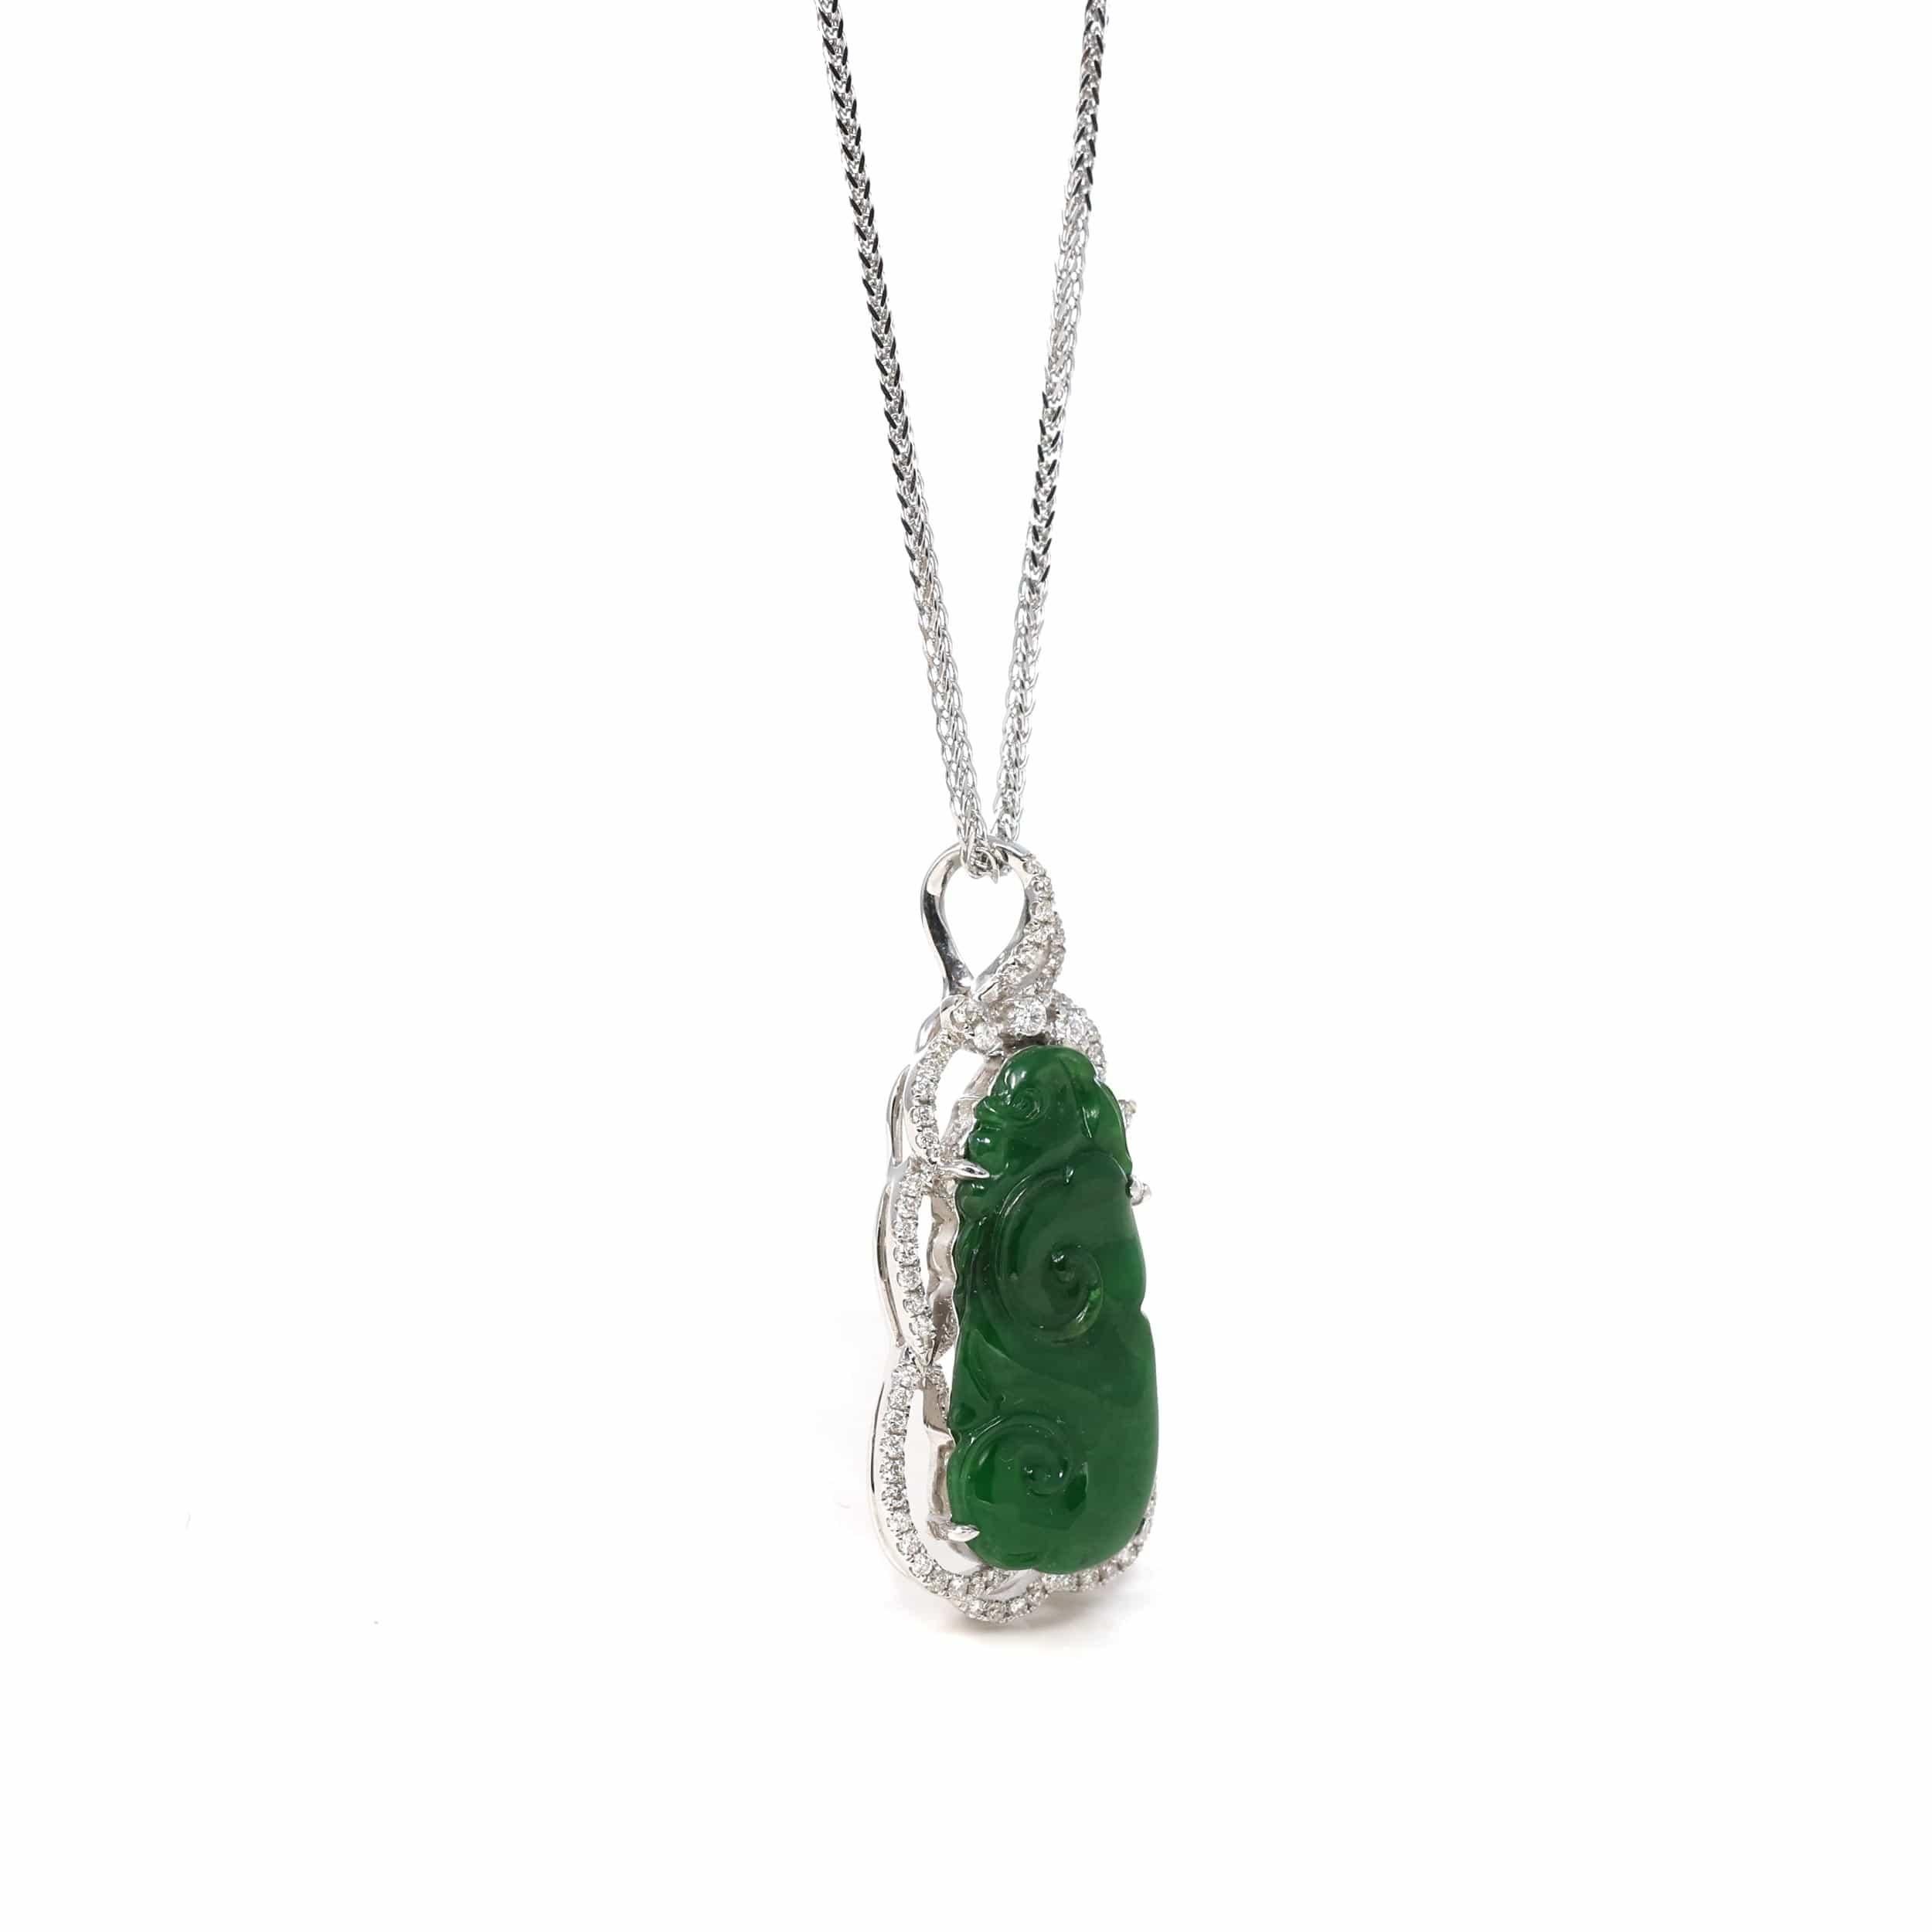 * DESIGN CONCEPT--- This necklace depicts a timeless symbol seen in jade. Representing calmness, happiness and contentment. The value of the piece comes from the natural Burmese imperial green jadeite jade. As photographed, the translucency of the